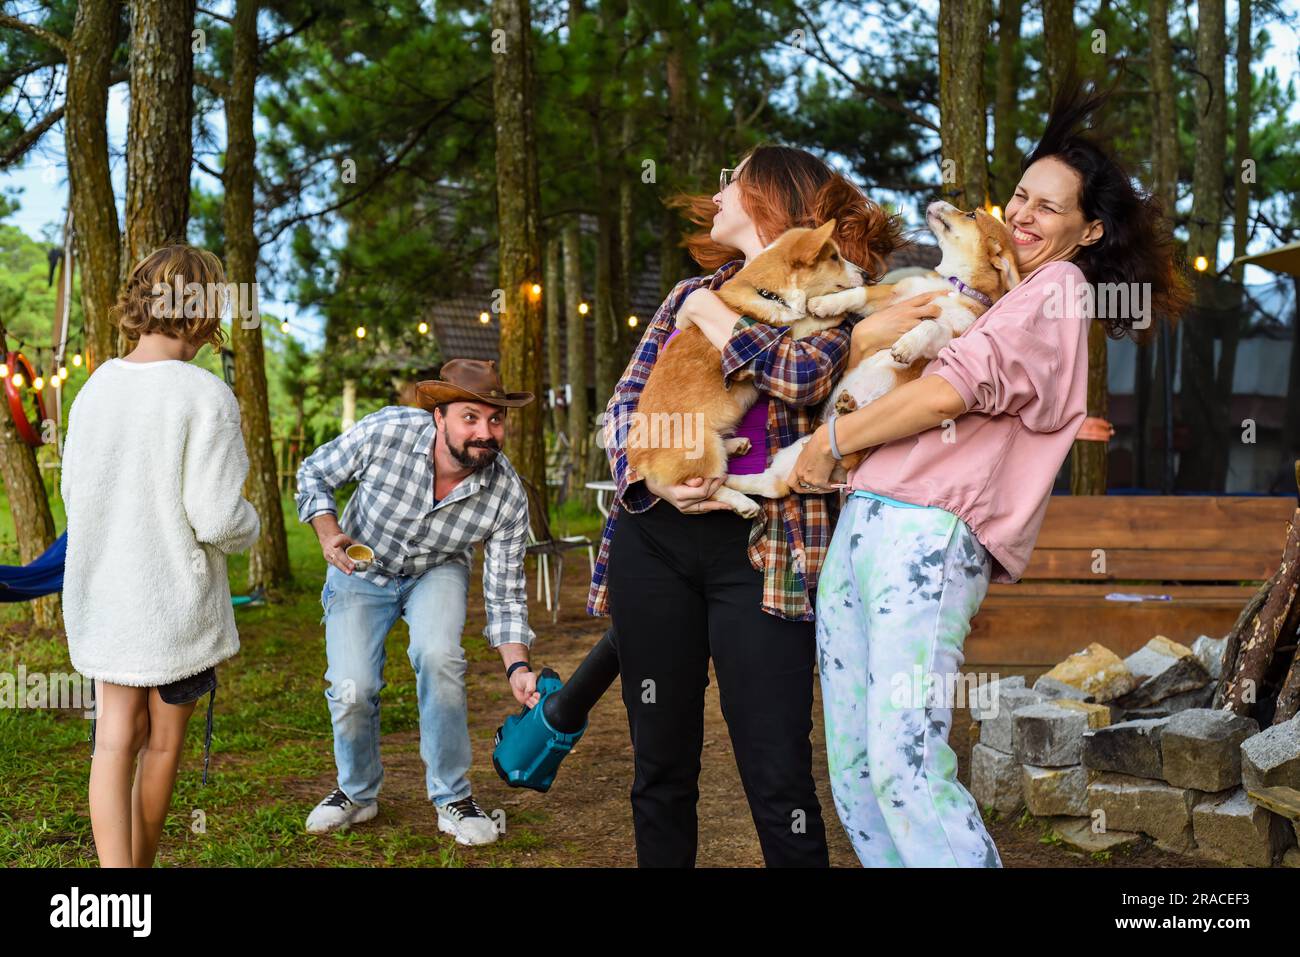 Funny family moment with father using garden blower for teasing his wife and daughter holding dogs Stock Photo